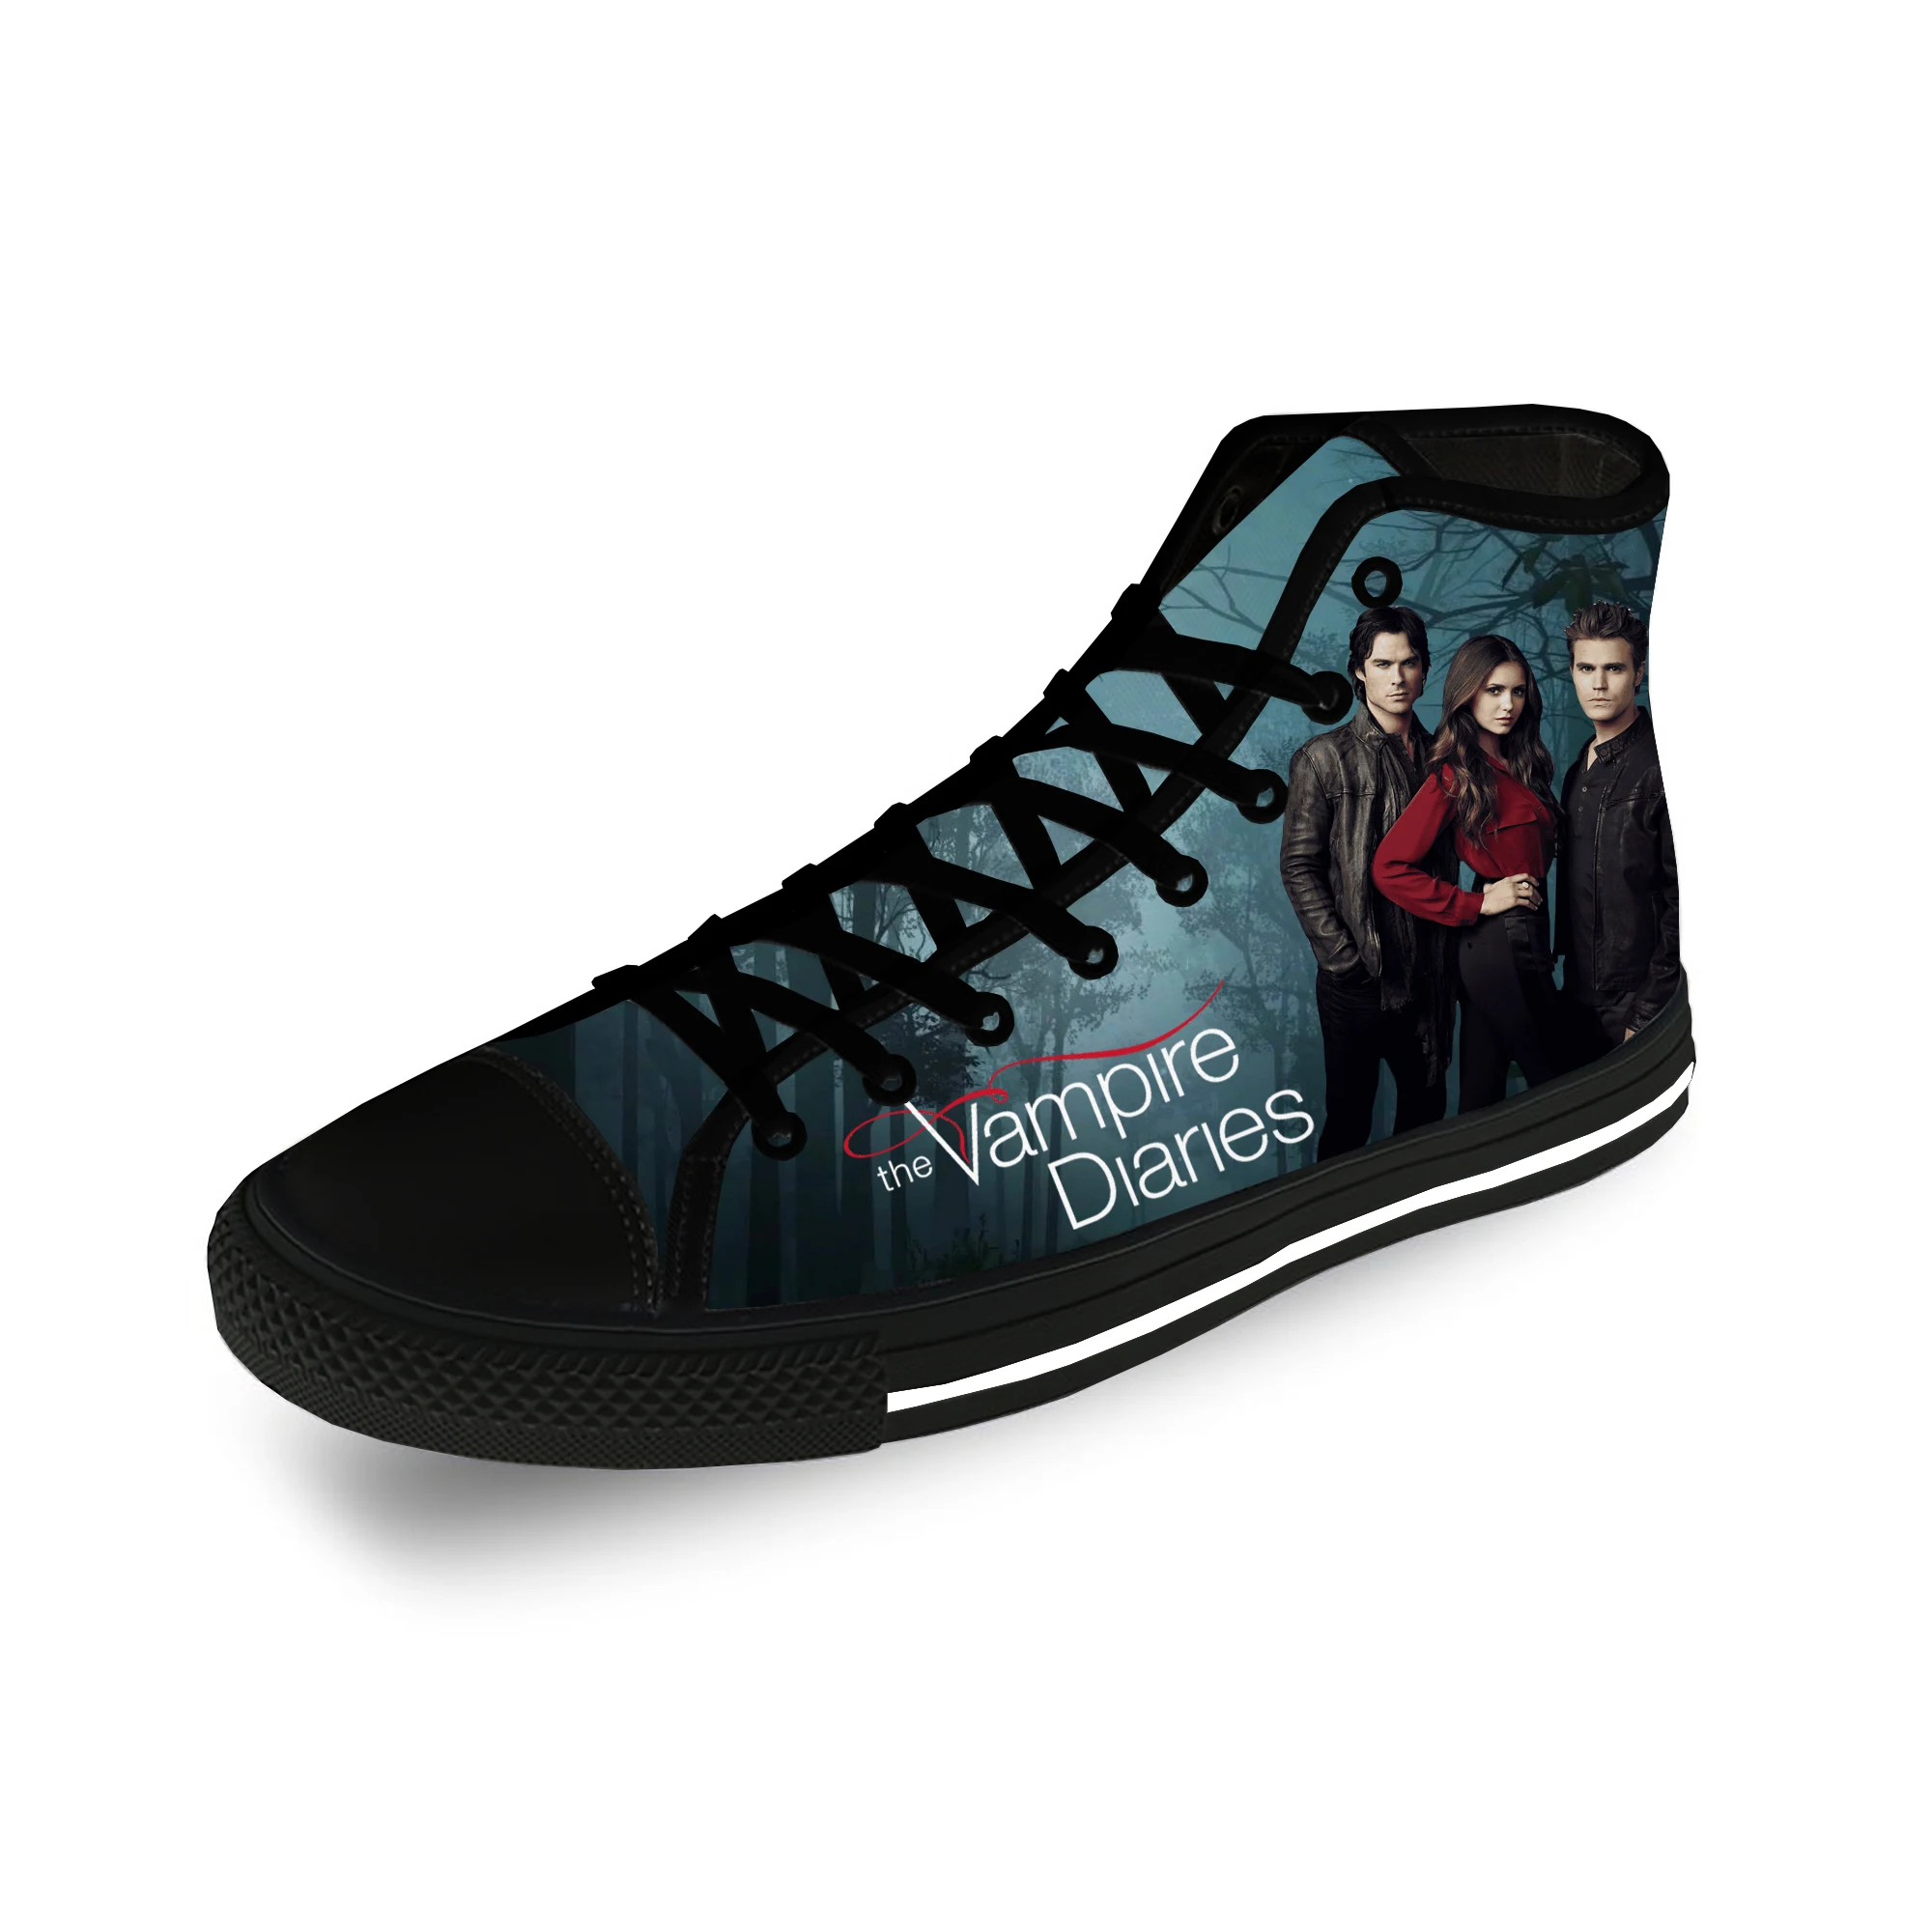 

The Vampire Diaries High Top Sneakers Mens Womens Teenager Casual Shoes Canvas Running Shoes 3D Print Lightweight shoe Black